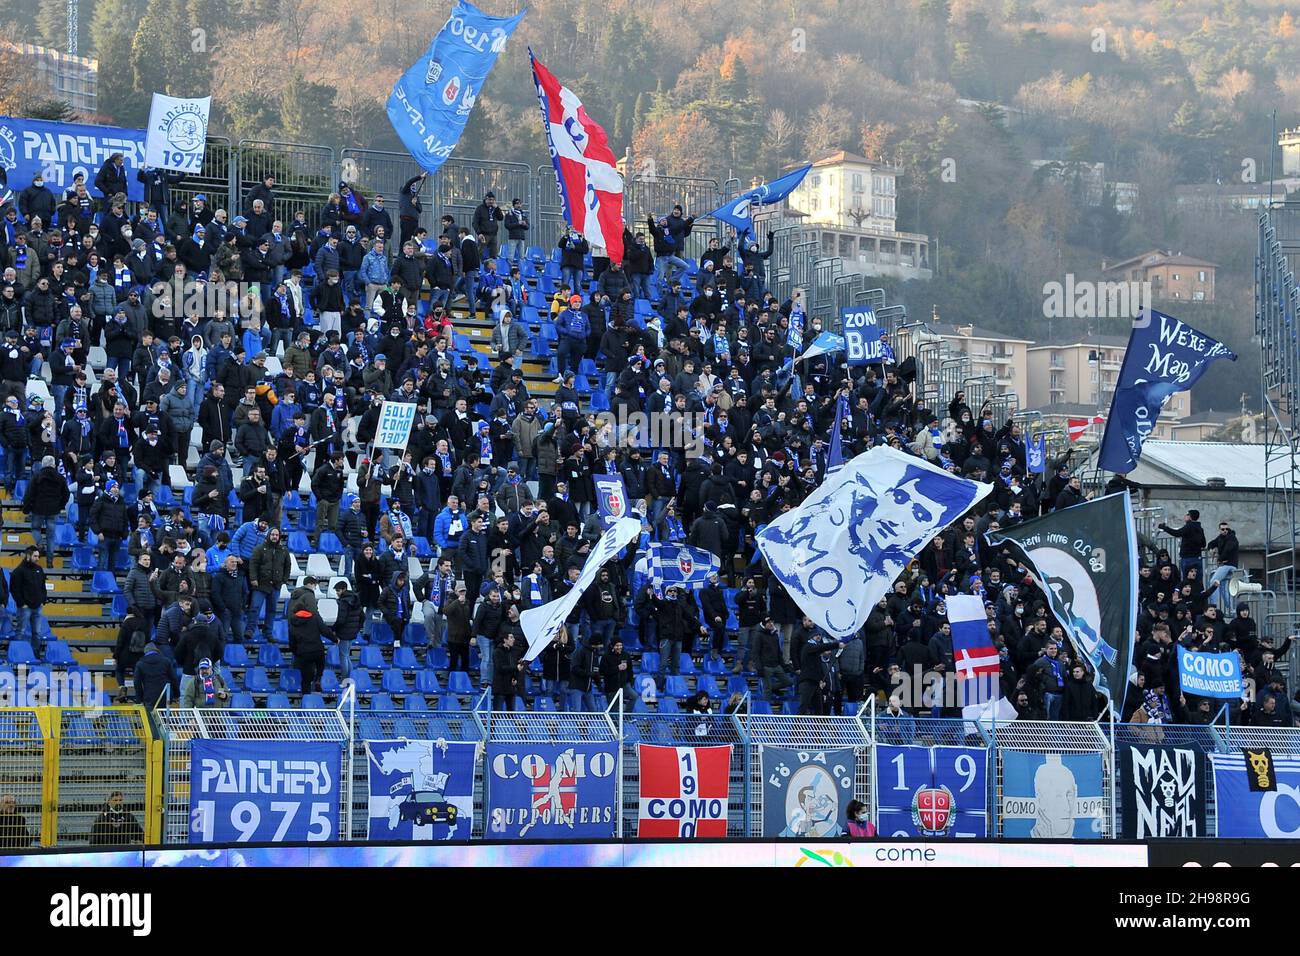 Fans of Como 1907 during the Serie B match between Ascoli Calcio 1898  News Photo - Getty Images